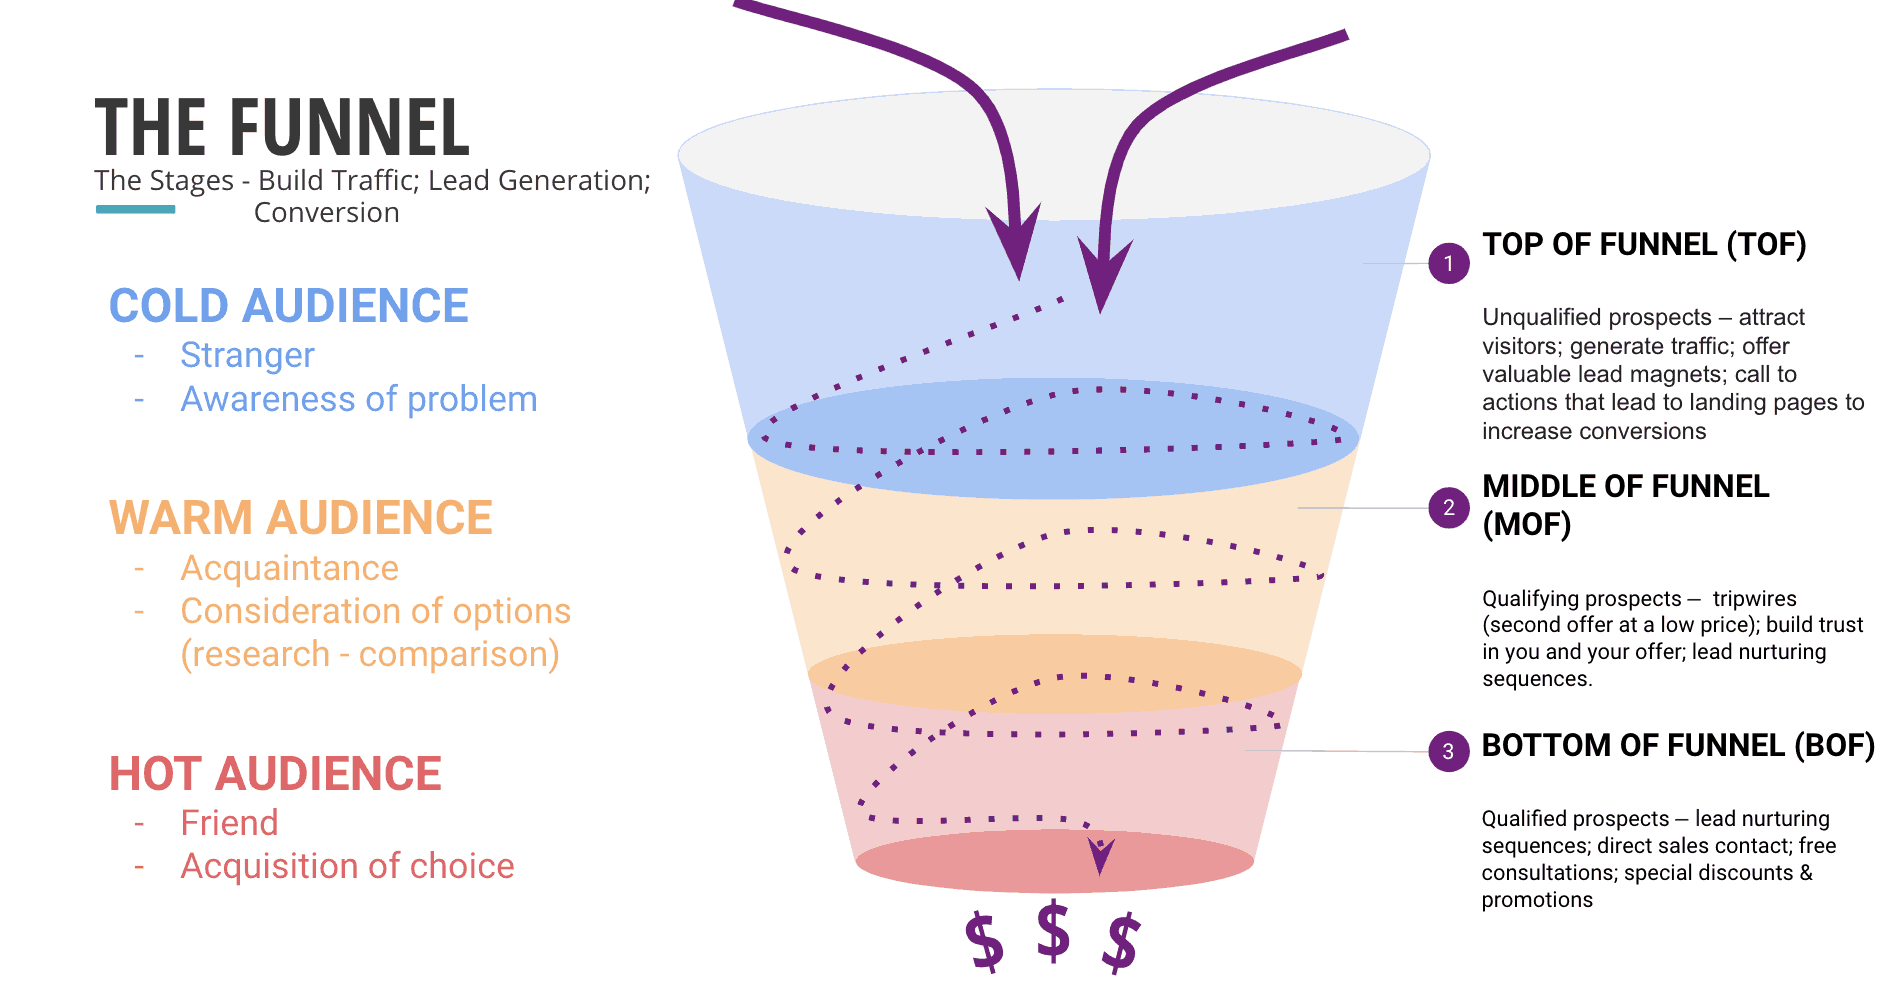 ¿Qué es Middle Of The Funnel? : MIDDLE OF THE FUNNEL